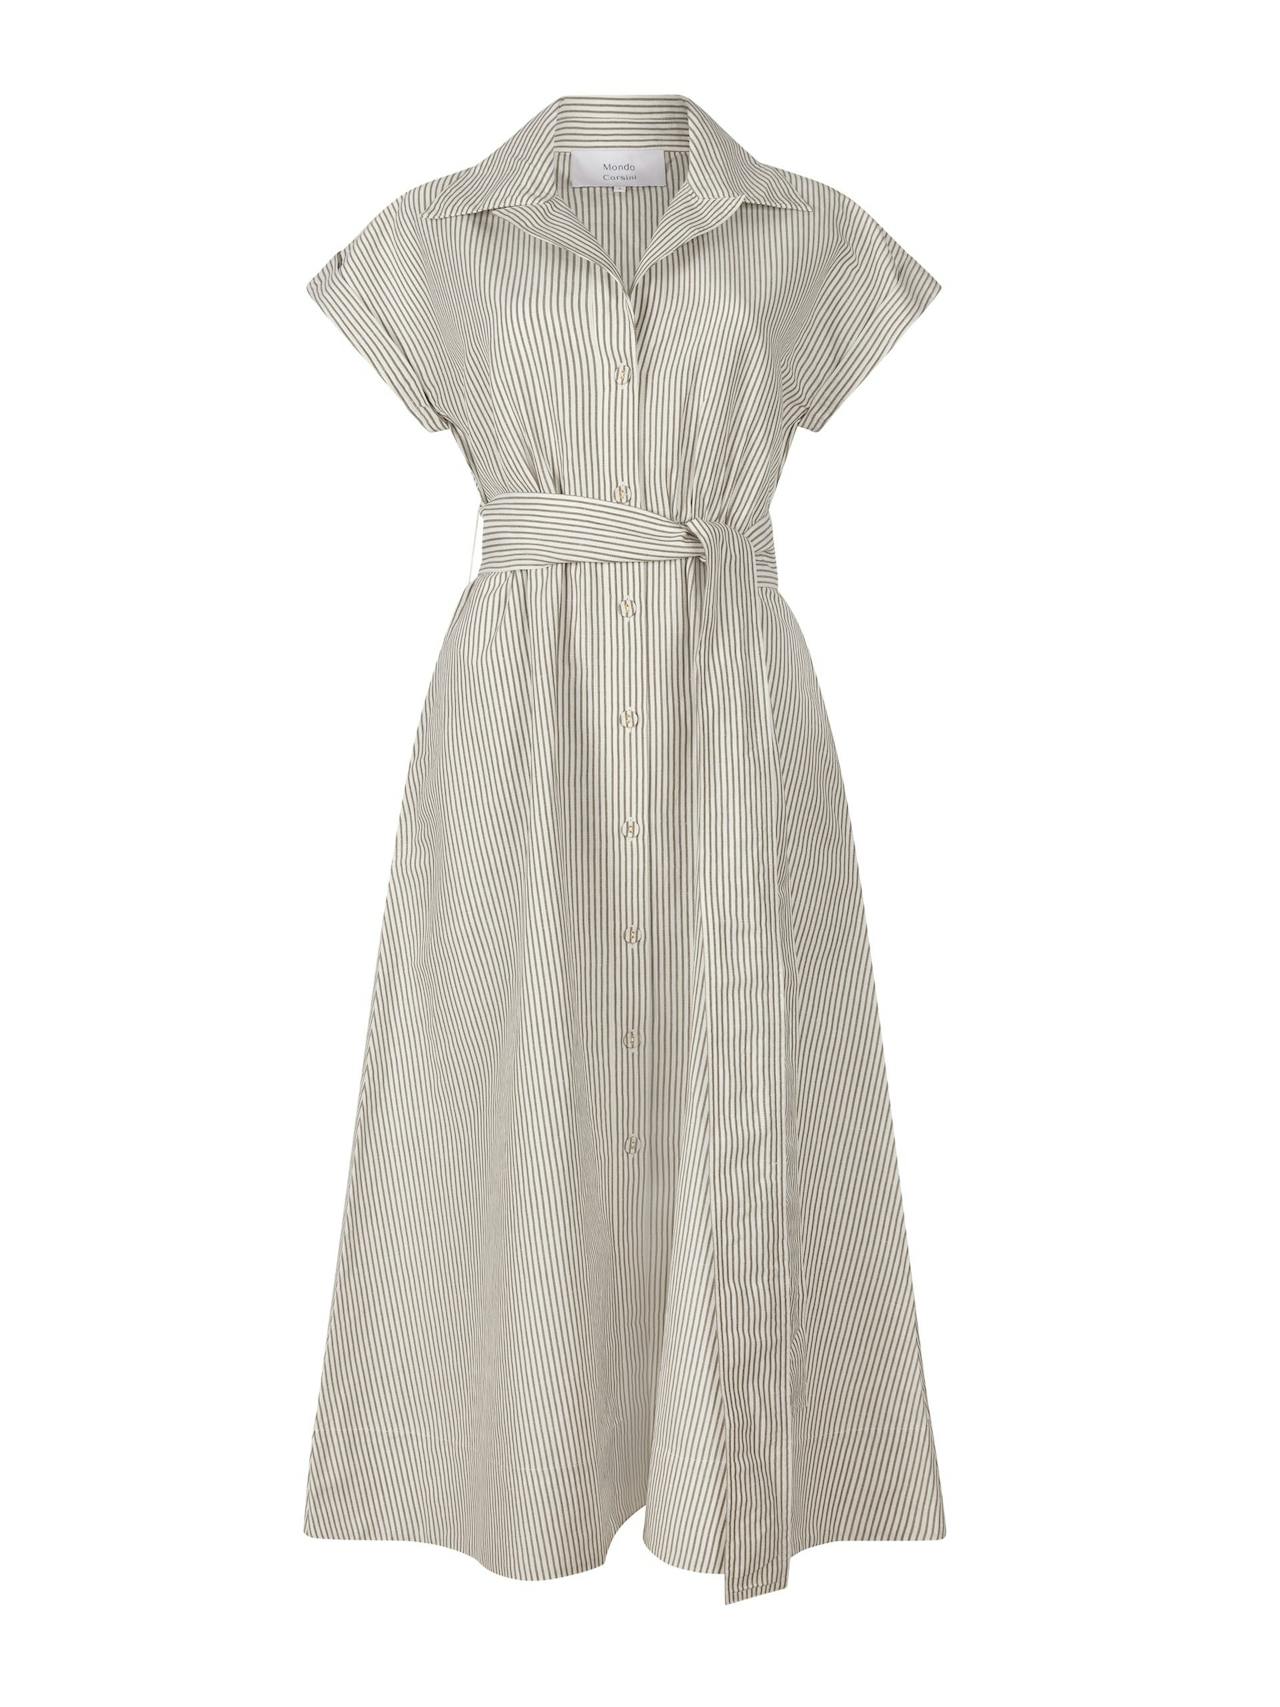 Lucy white and moss linen weave dress